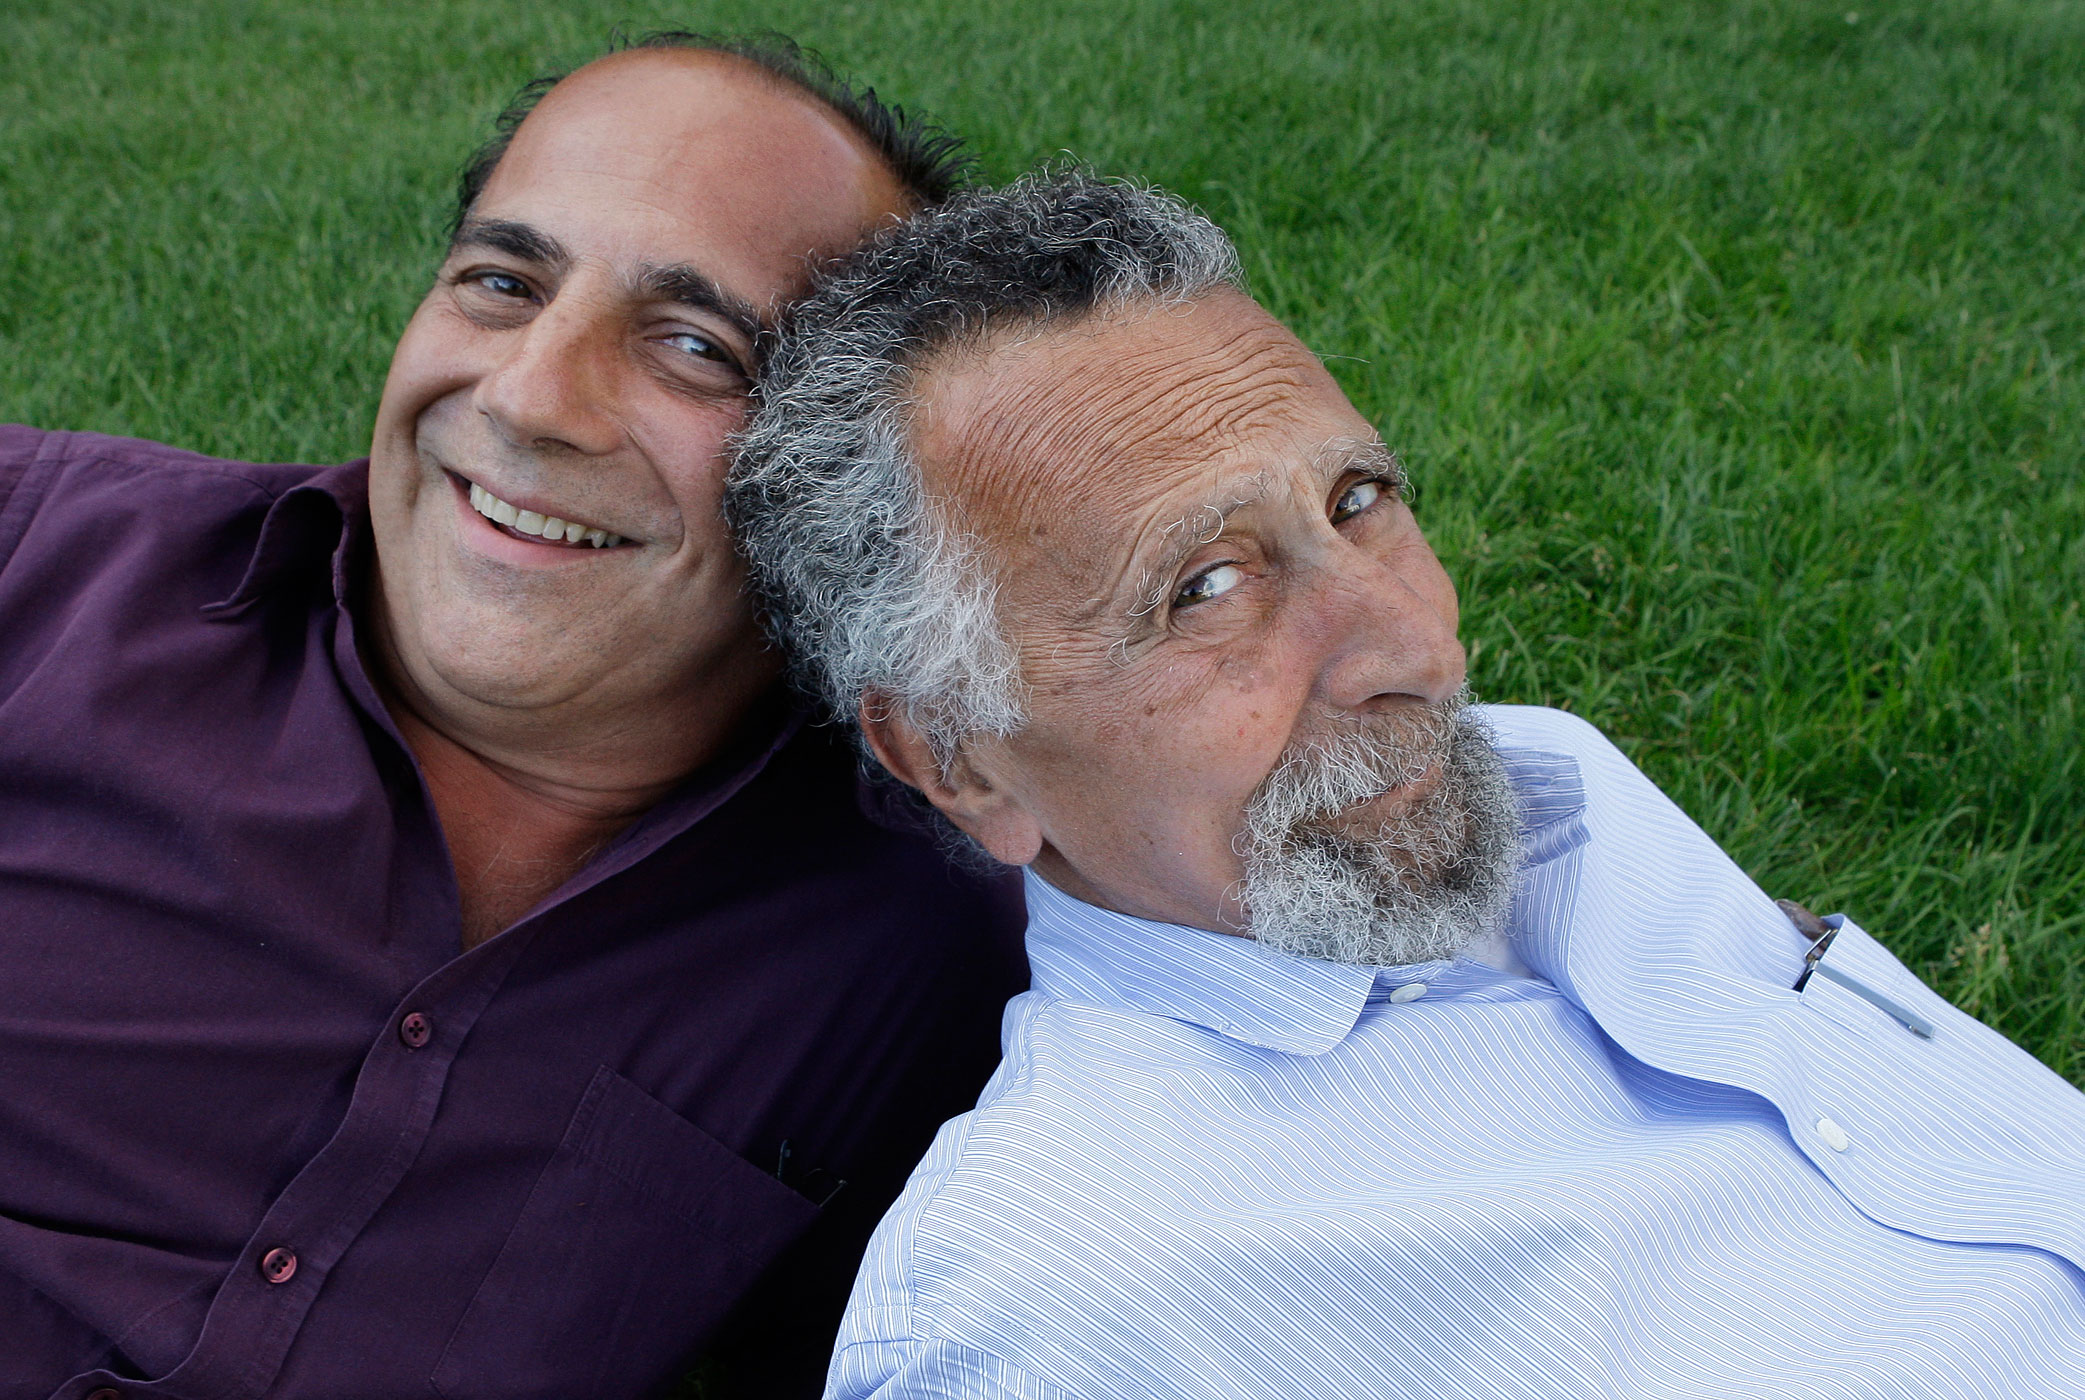 Brothers Ray, left, and Tom Magliozzi, co-hosts of National Public Radio's <i>Car Talk</i>, pose for a photo in Cambridge, Mass on June 19, 2008. (Charles Krupa—AP)